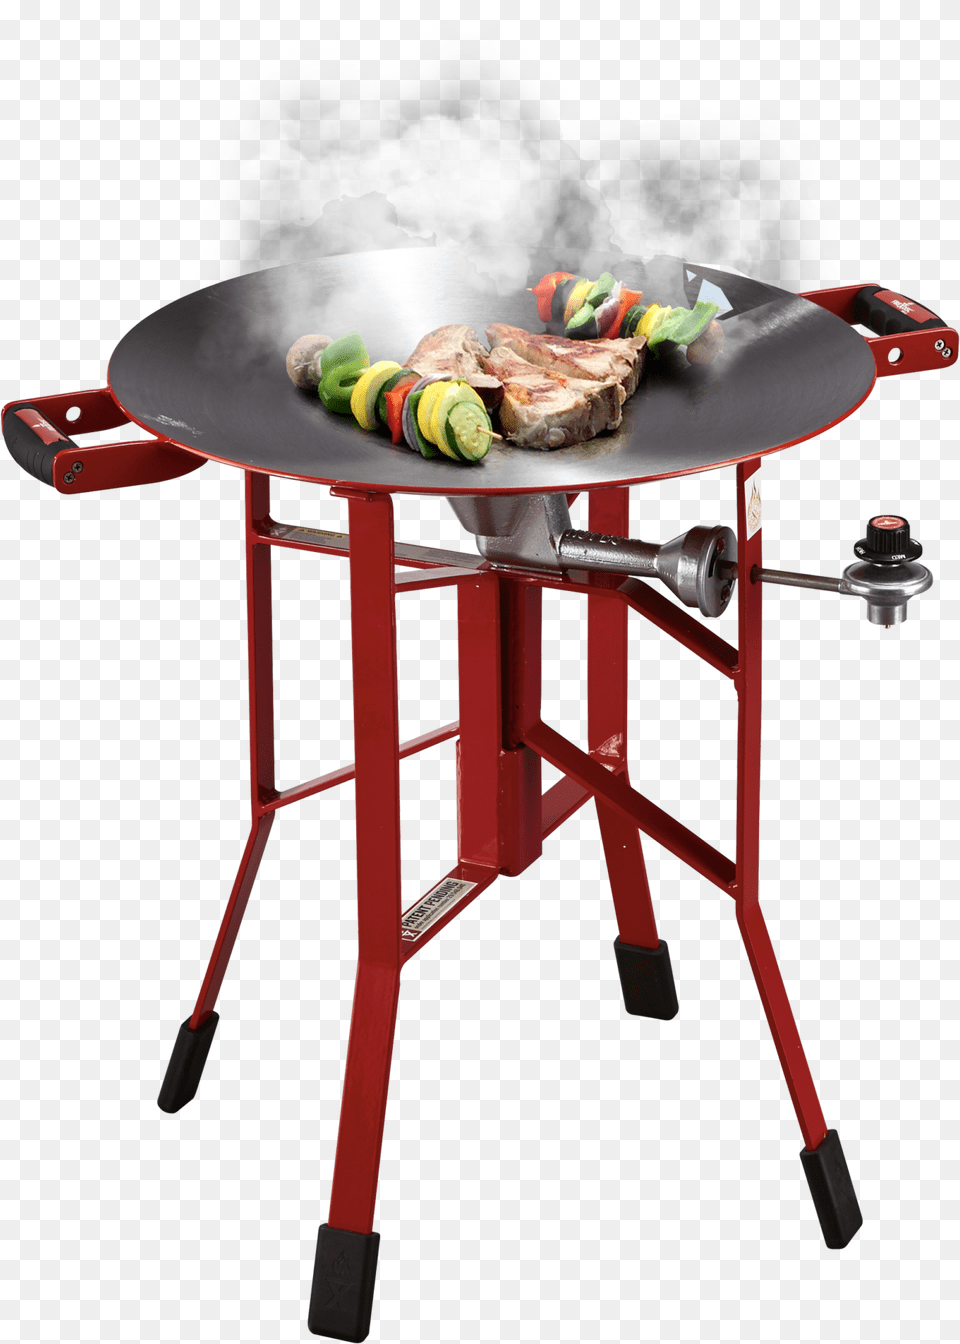 Firedisc, Cooking Pan, Cookware, Bbq, Grilling Free Png